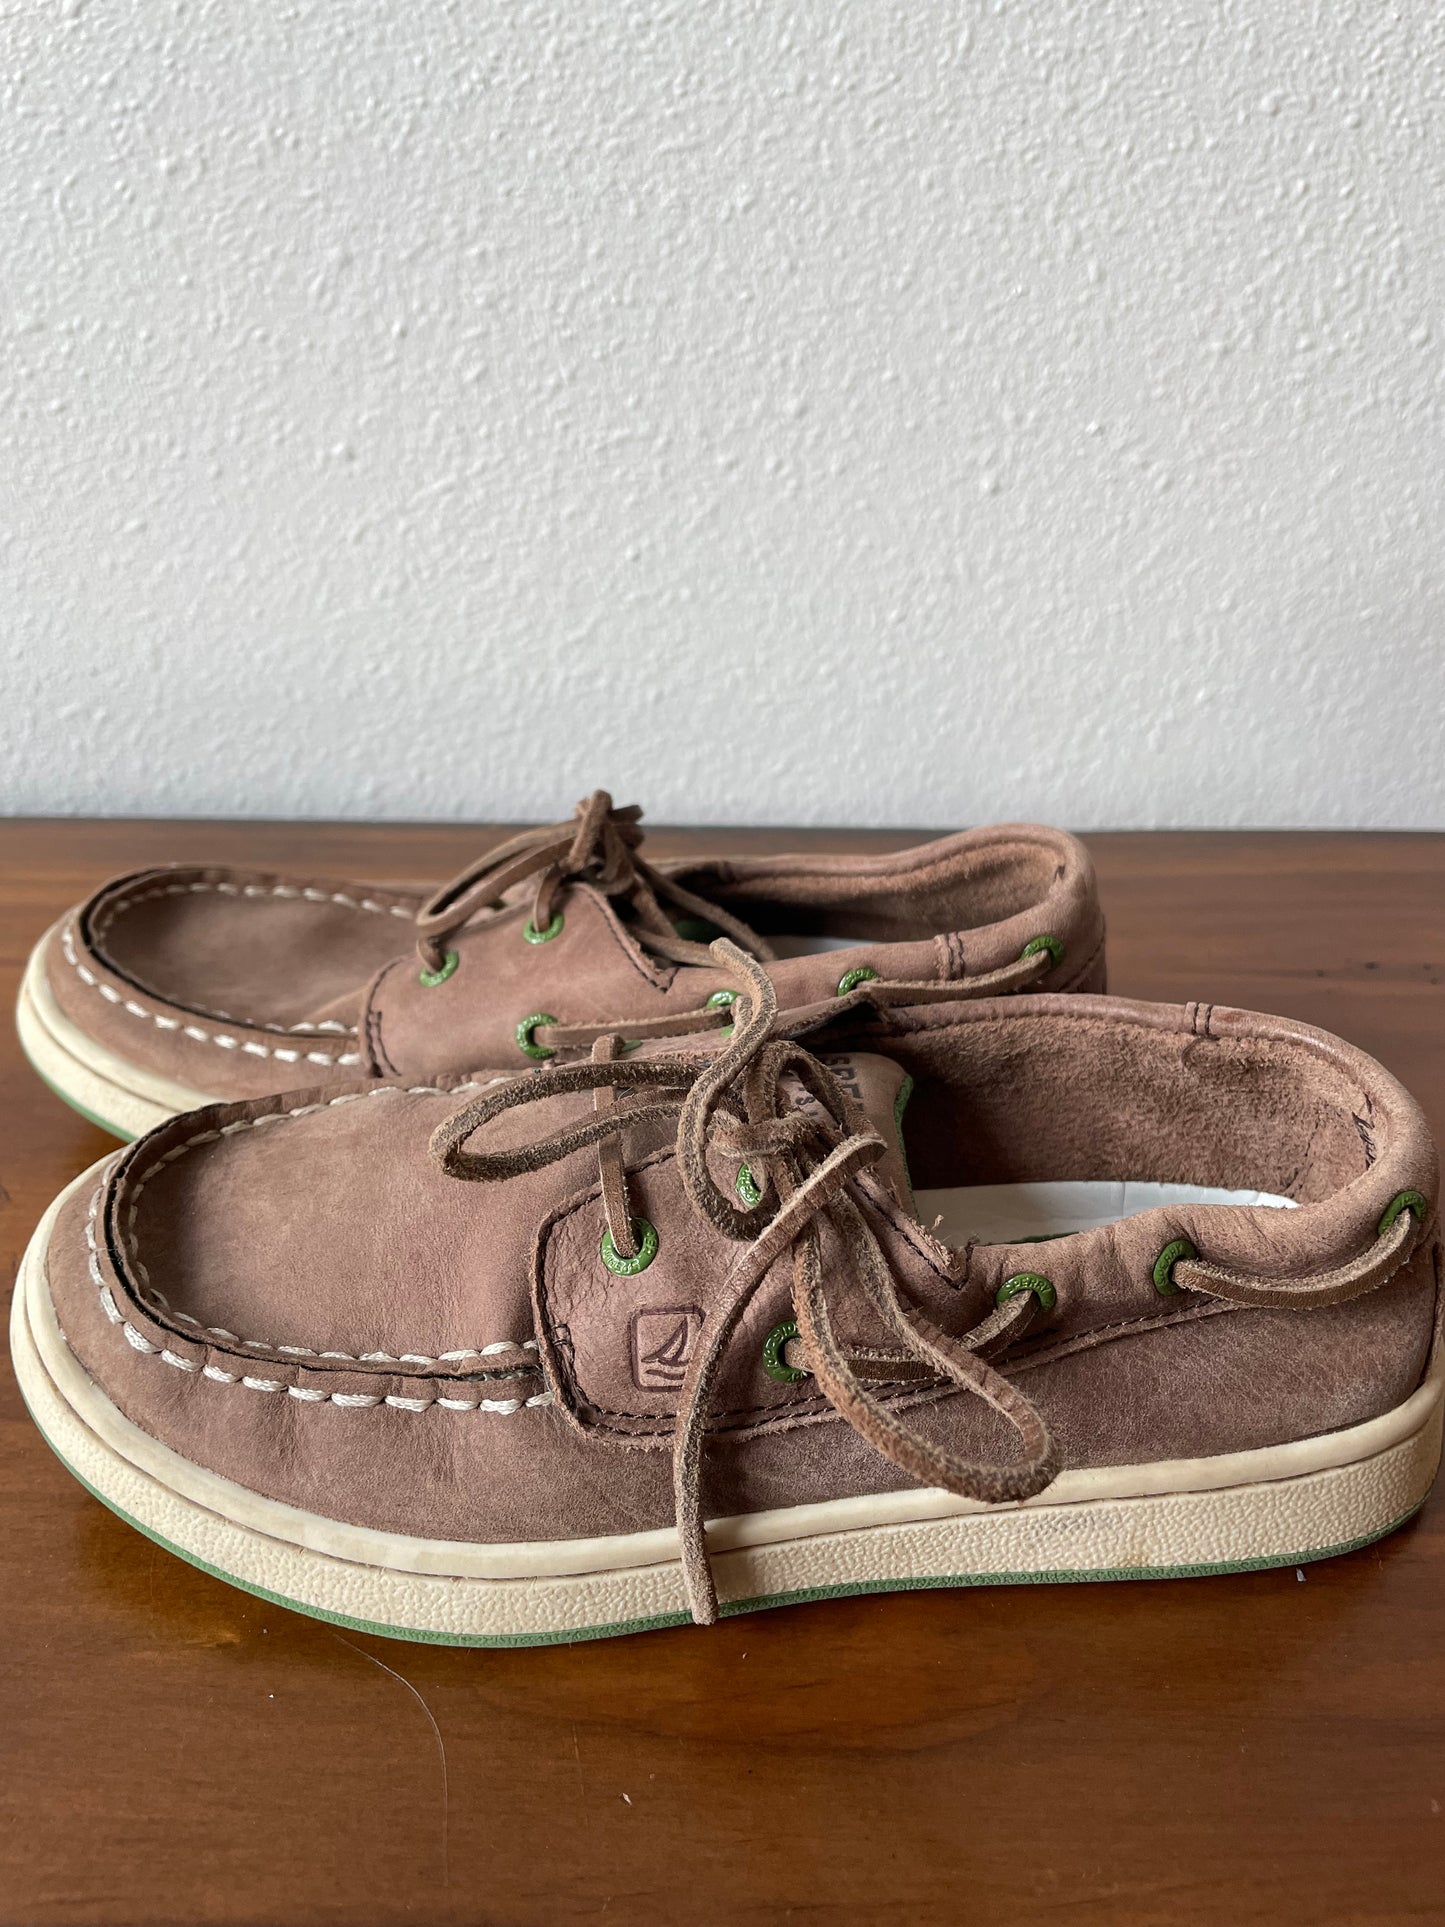 Sperry Top-Sider Youth Loafers (13M)